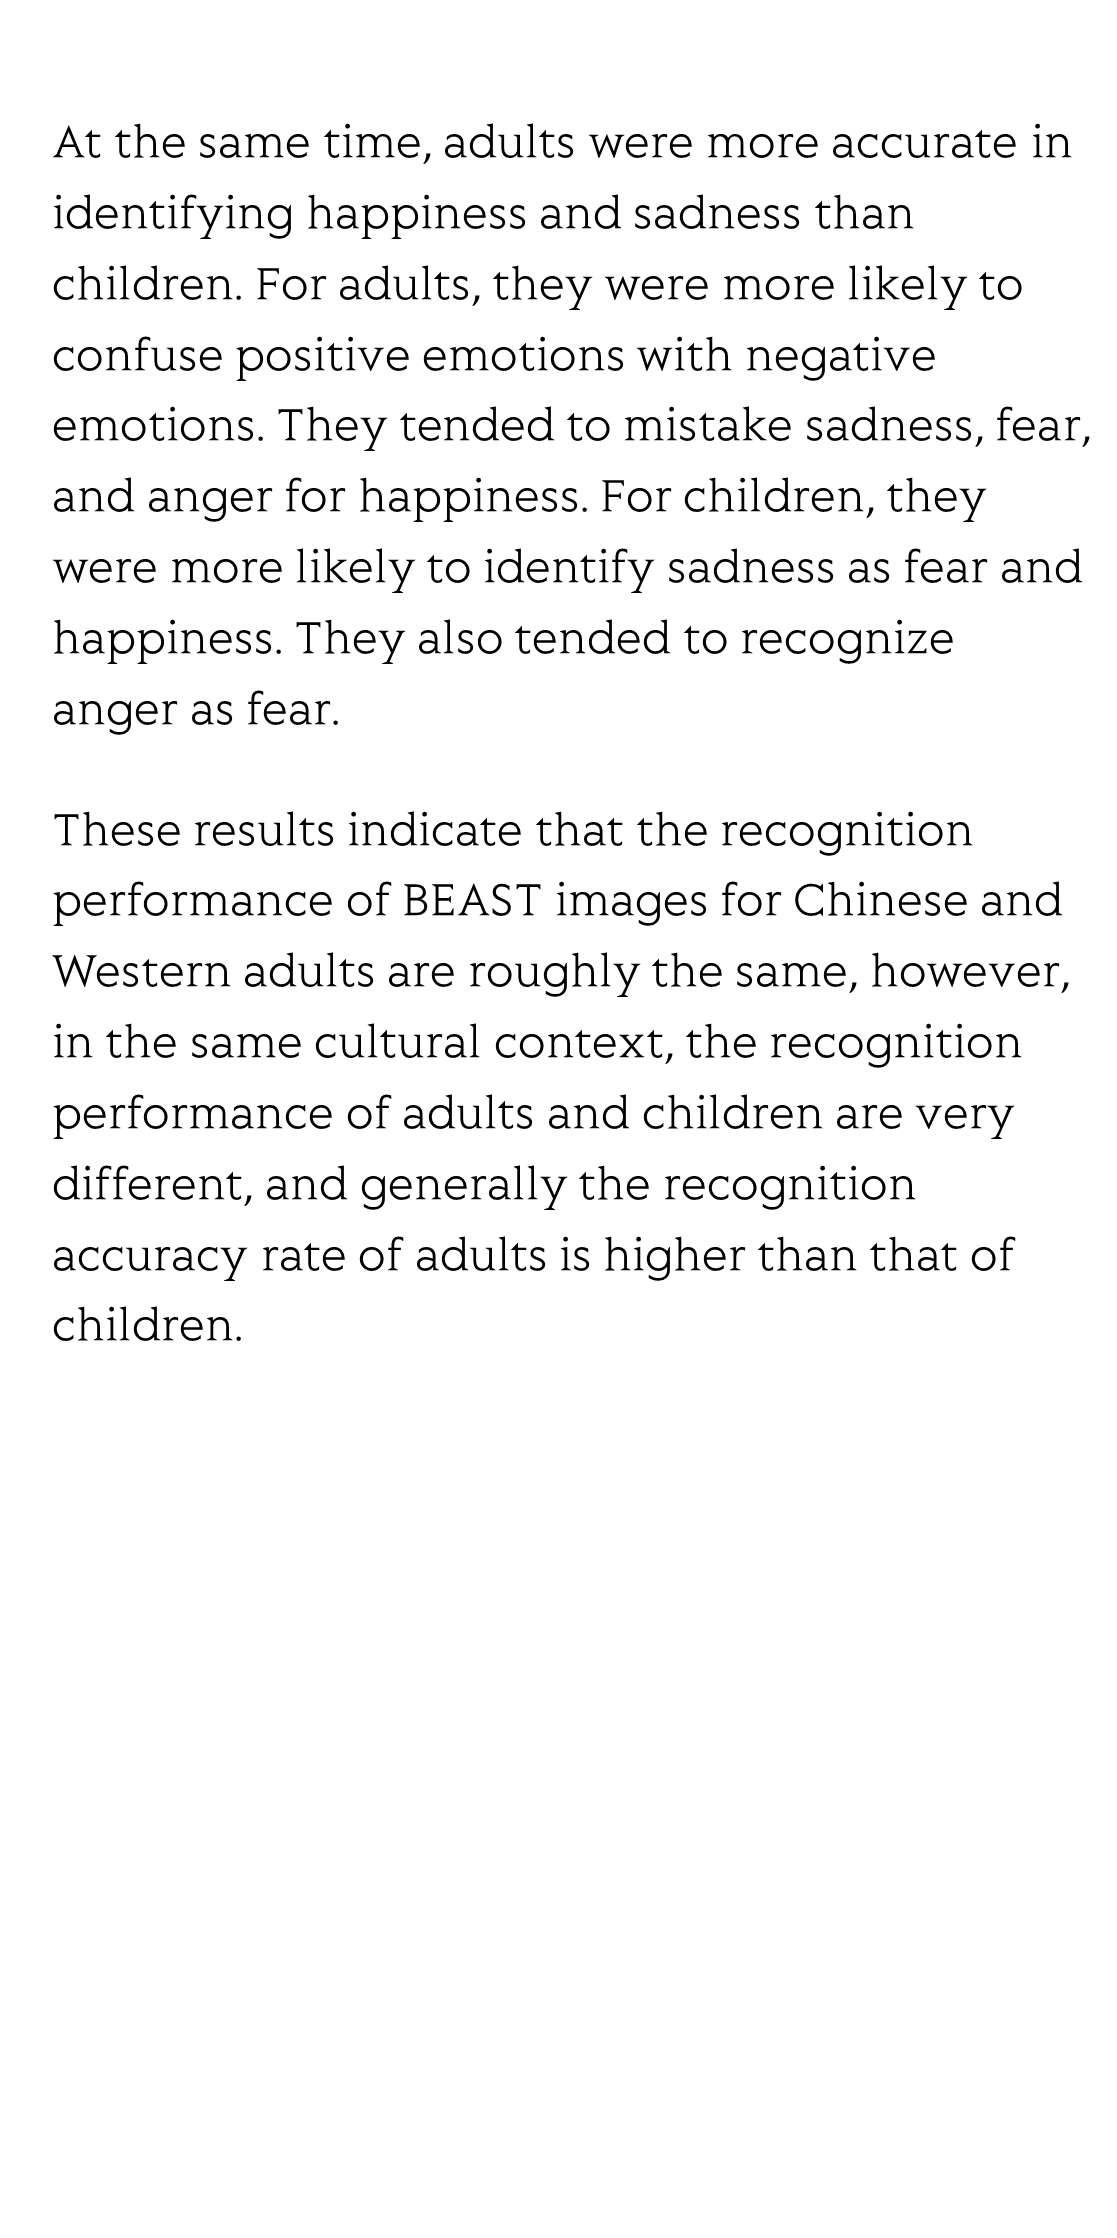 Validation of the bodily expressive action stimulus test among Chinese adults and children_3